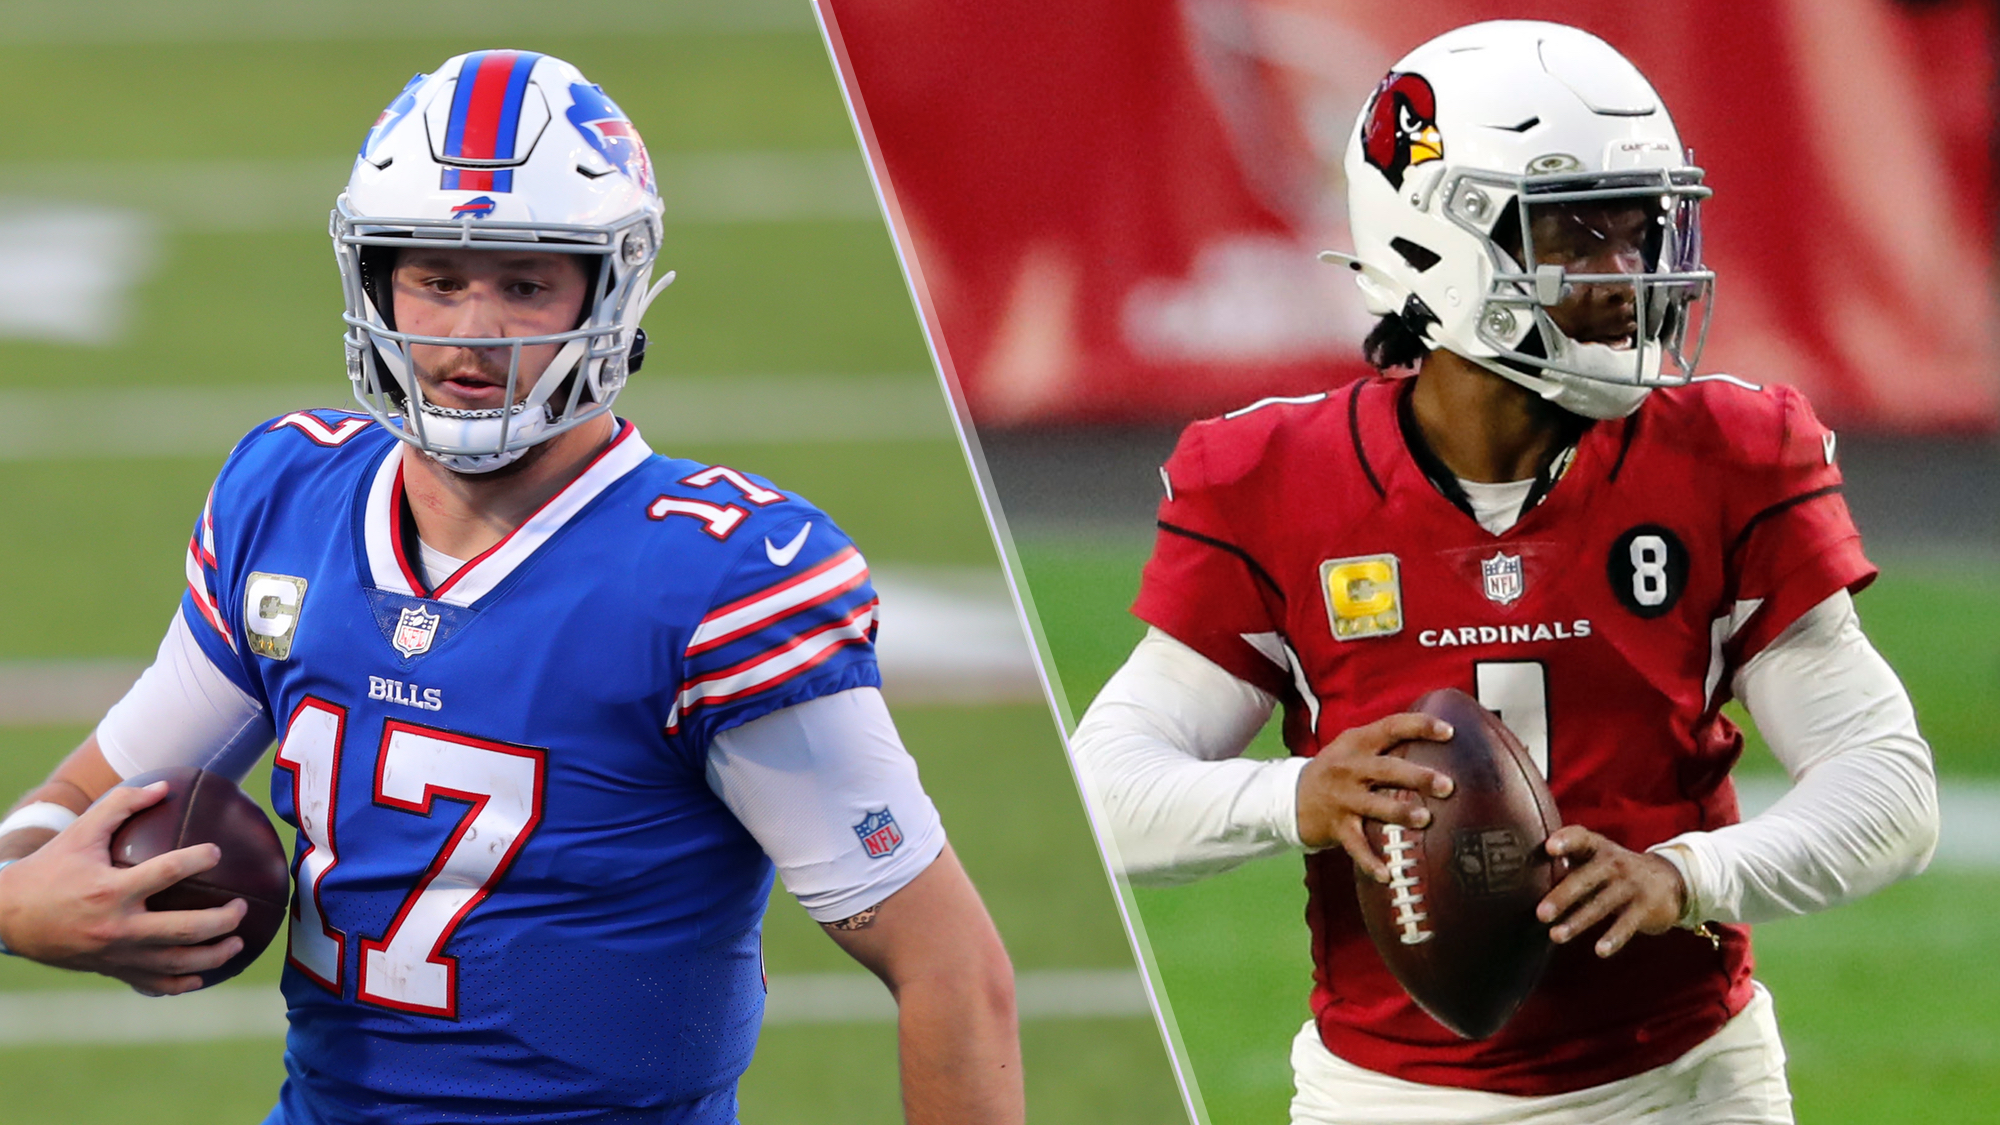 Bills vs Cardinals live stream How to watch NFL week 10 game online Toms Guide